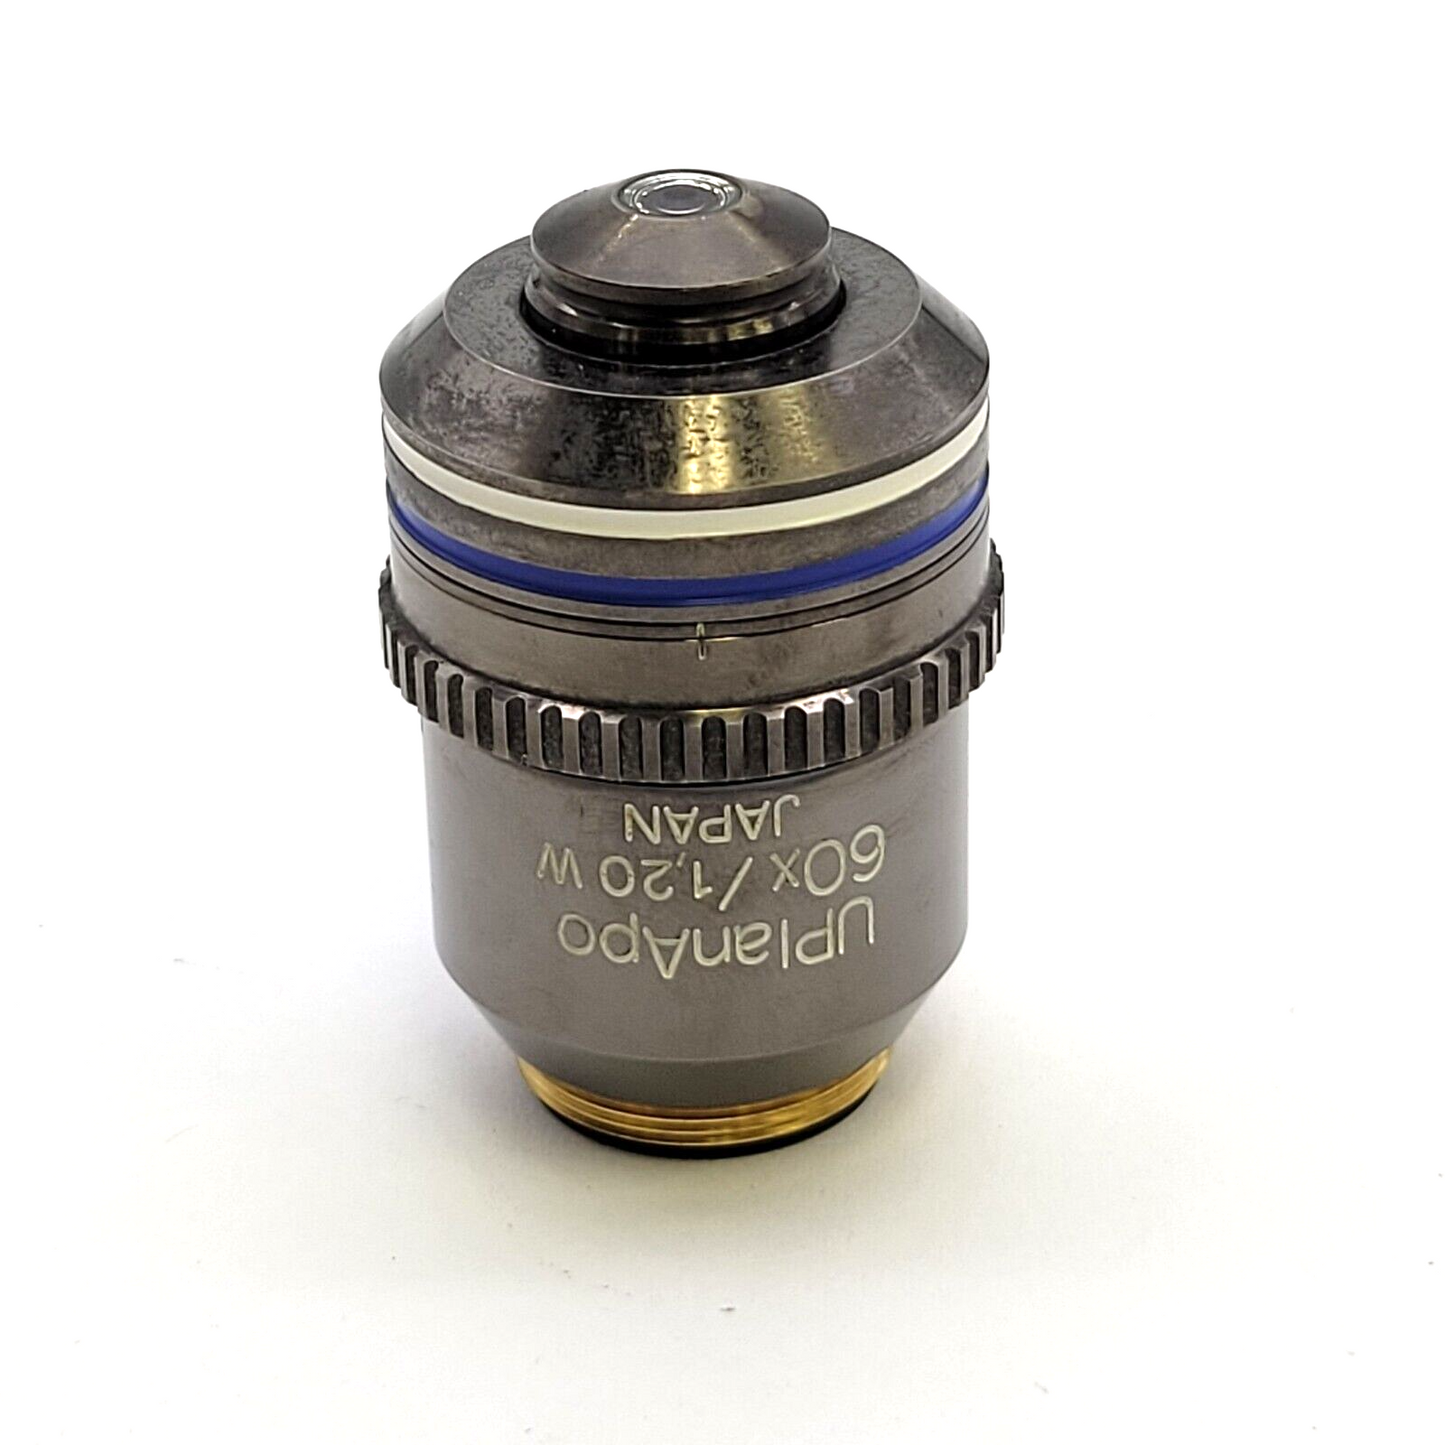 Olympus Microscope Objective UPlanApo 60x / 1.20 W Water Immersion ∞/0.13-0.21 - microscopemarketplace